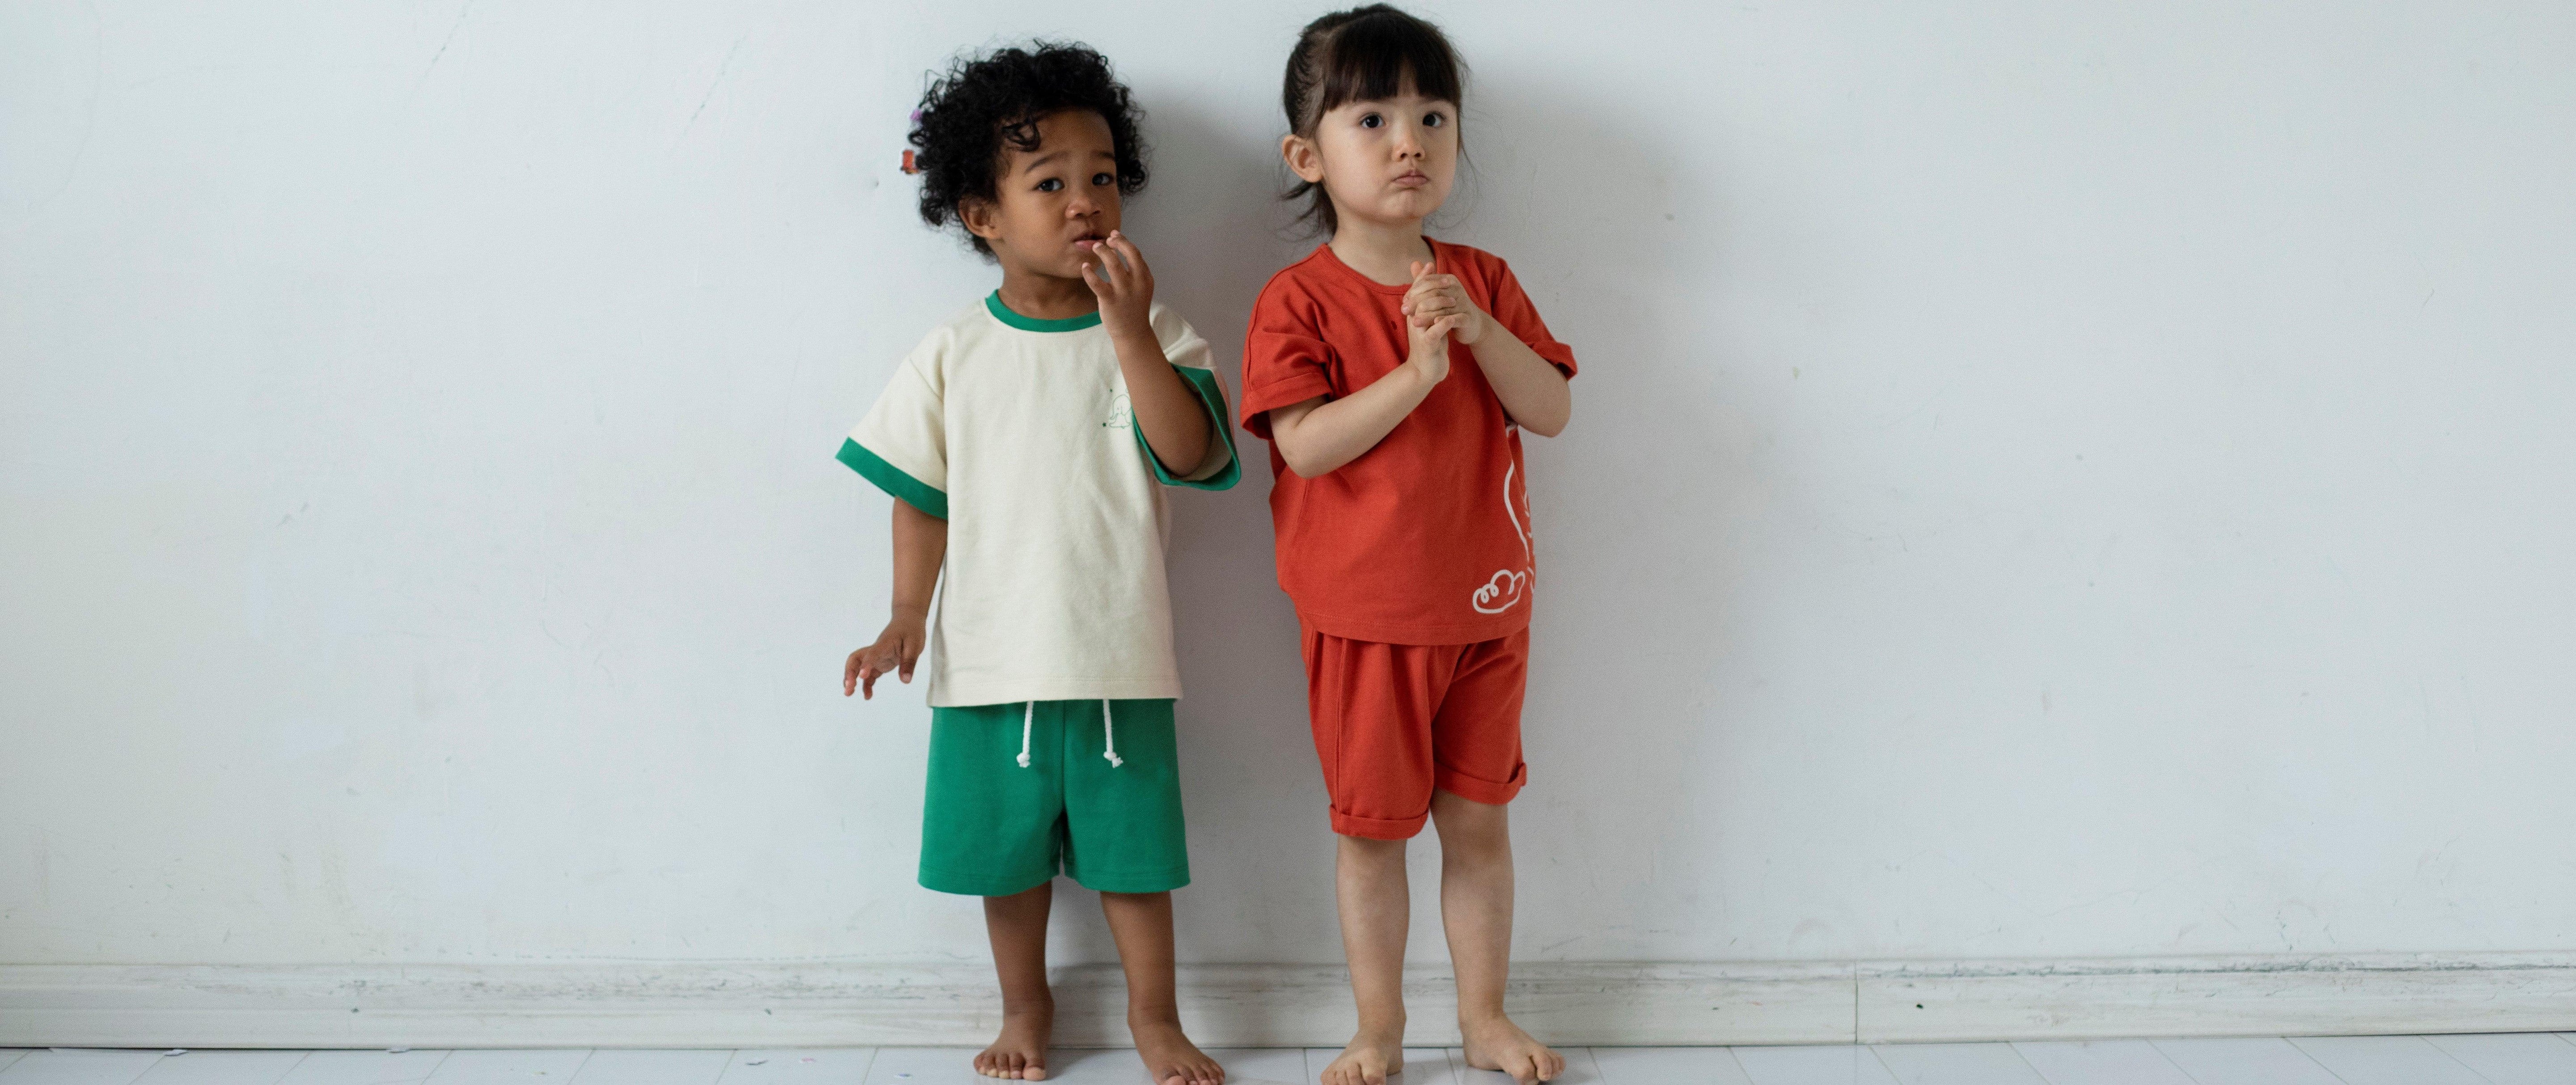 our babies and kids's organic clothing sets which are made from GOTS-certified organic cotton. Essential for baby girls and baby boys - NORSU-ORGANIC